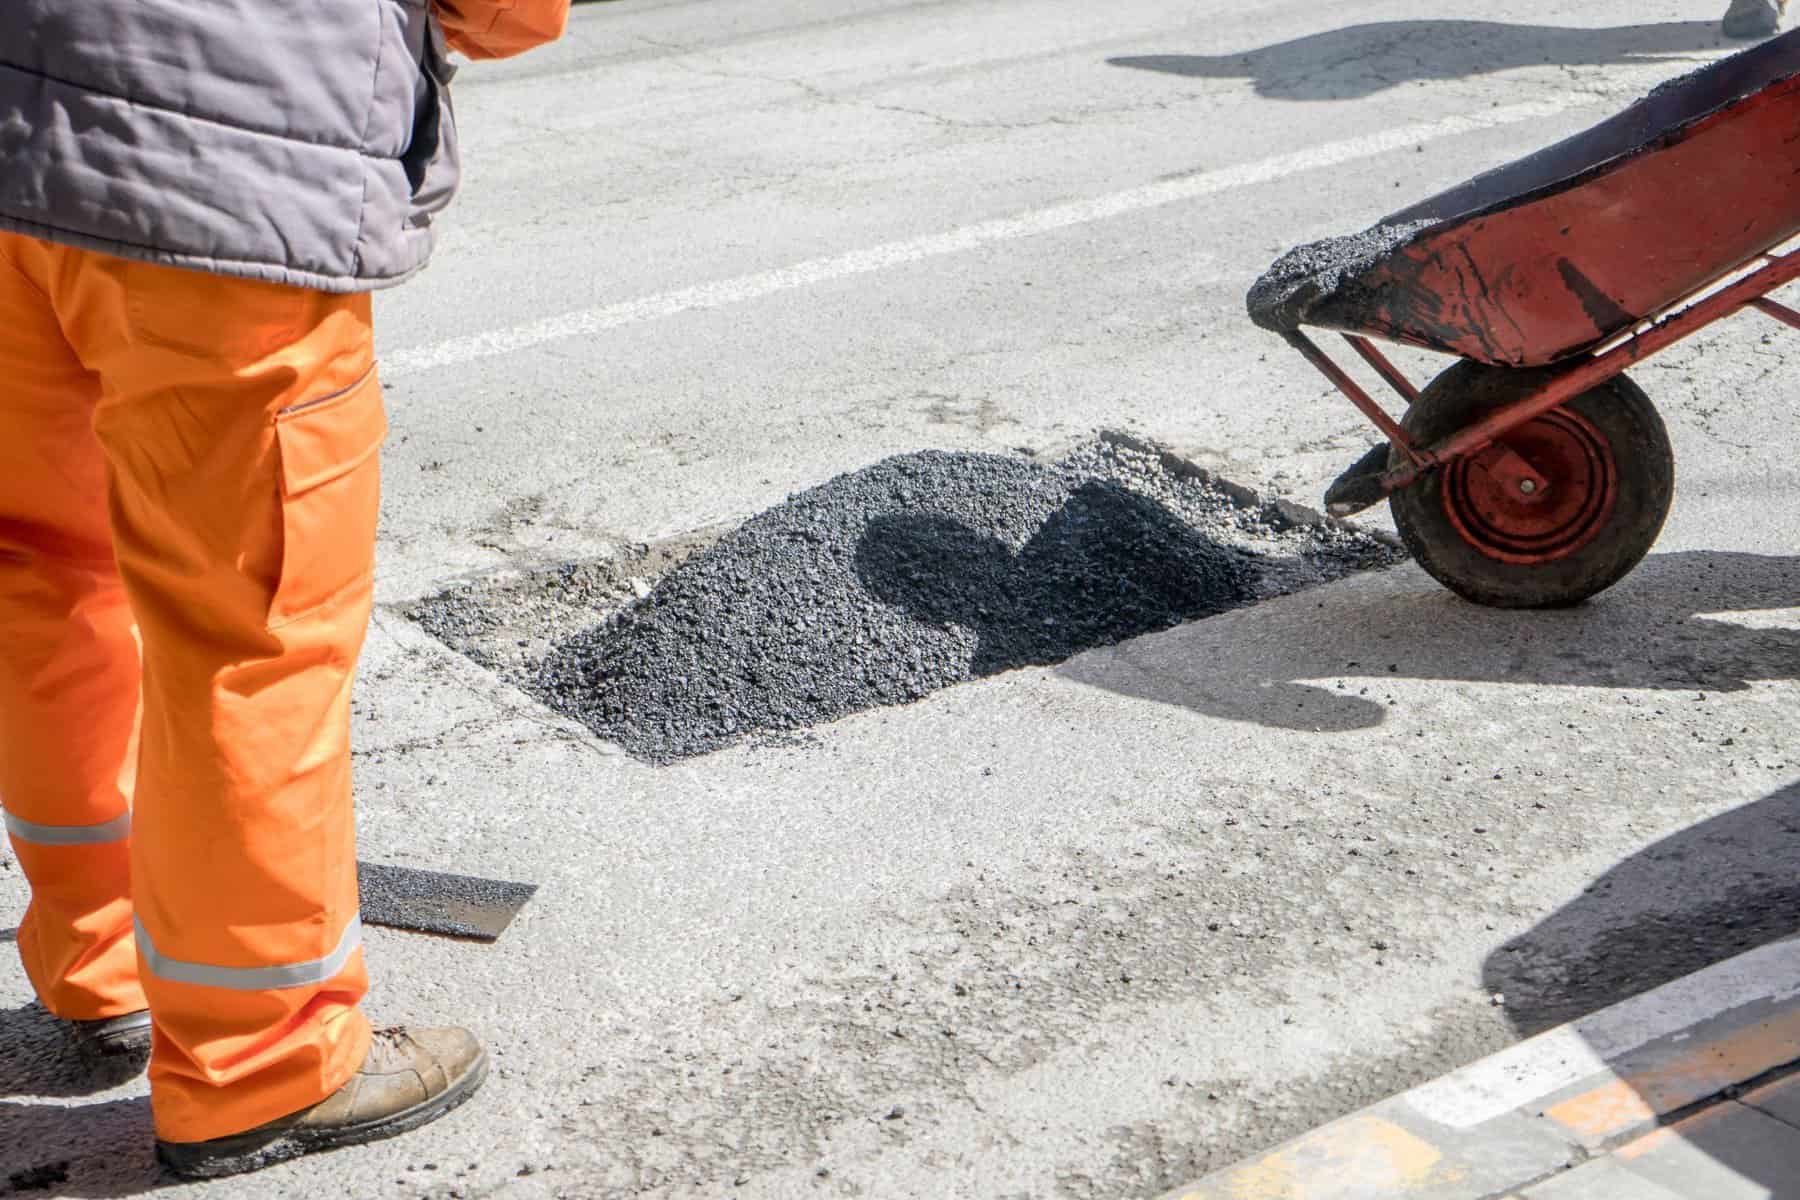 The contractors are repairing this pothole before it gets larger and more dangerous.